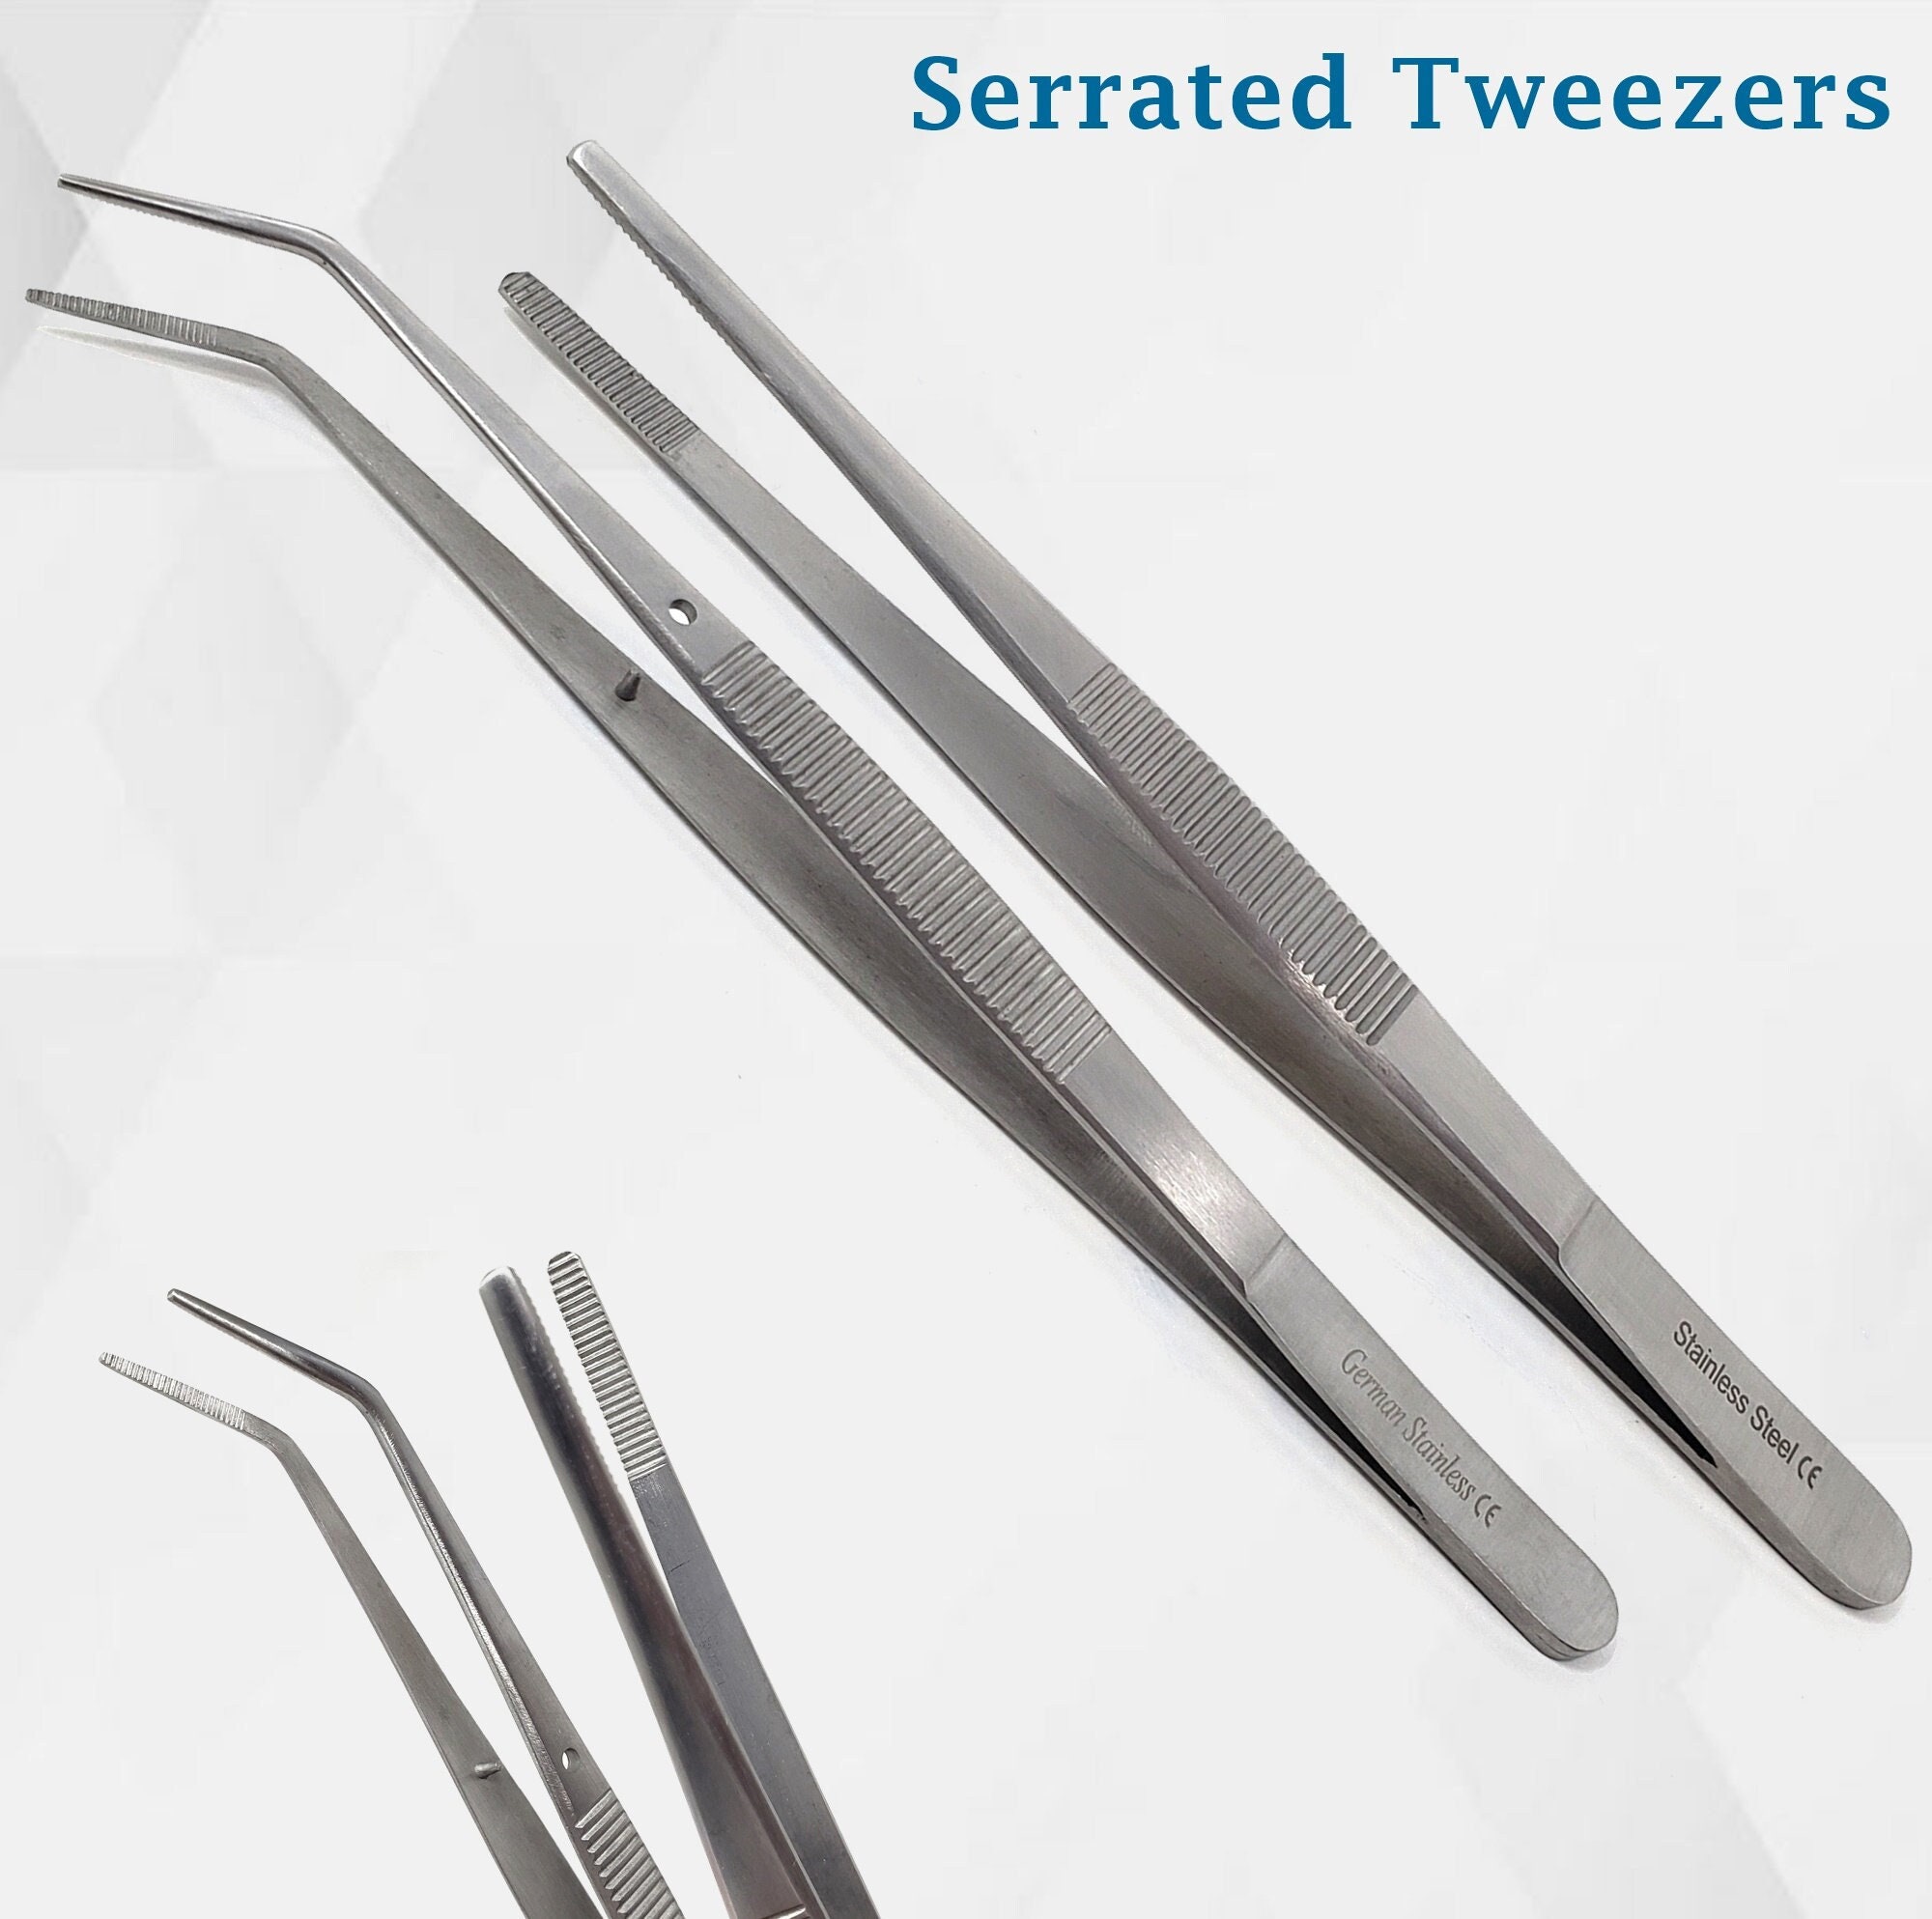 Long Forceps Tweezers, Serrated Bent Tweezers Flat Tips Precision Curved  Science Surgical Tongs Jewelers Needle Metal Sewing Sharp Small Kitchen